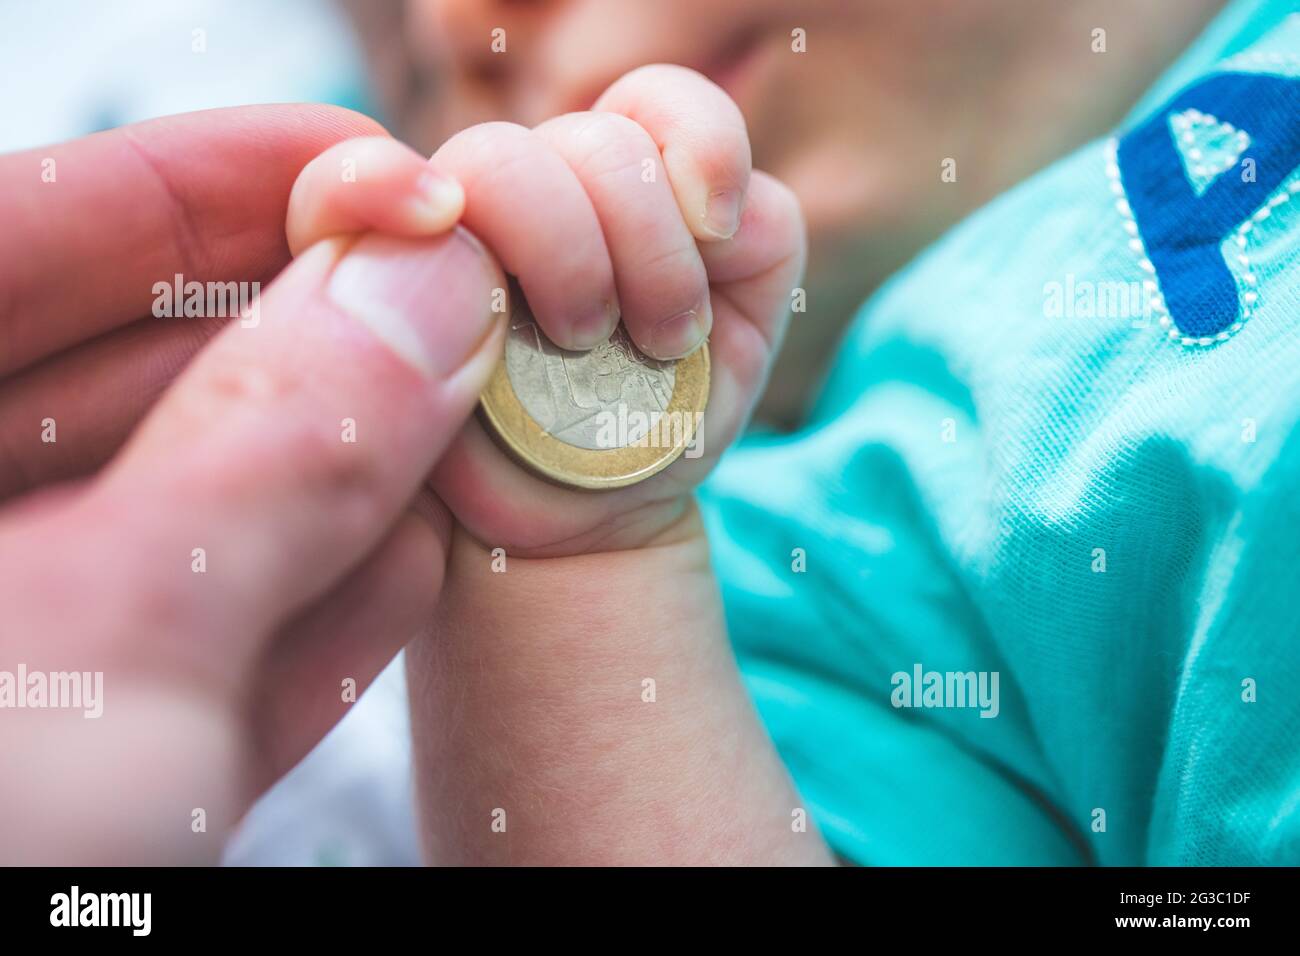 Close up of newborn baby hands holding a coin, retirement arrangement concept Stock Photo